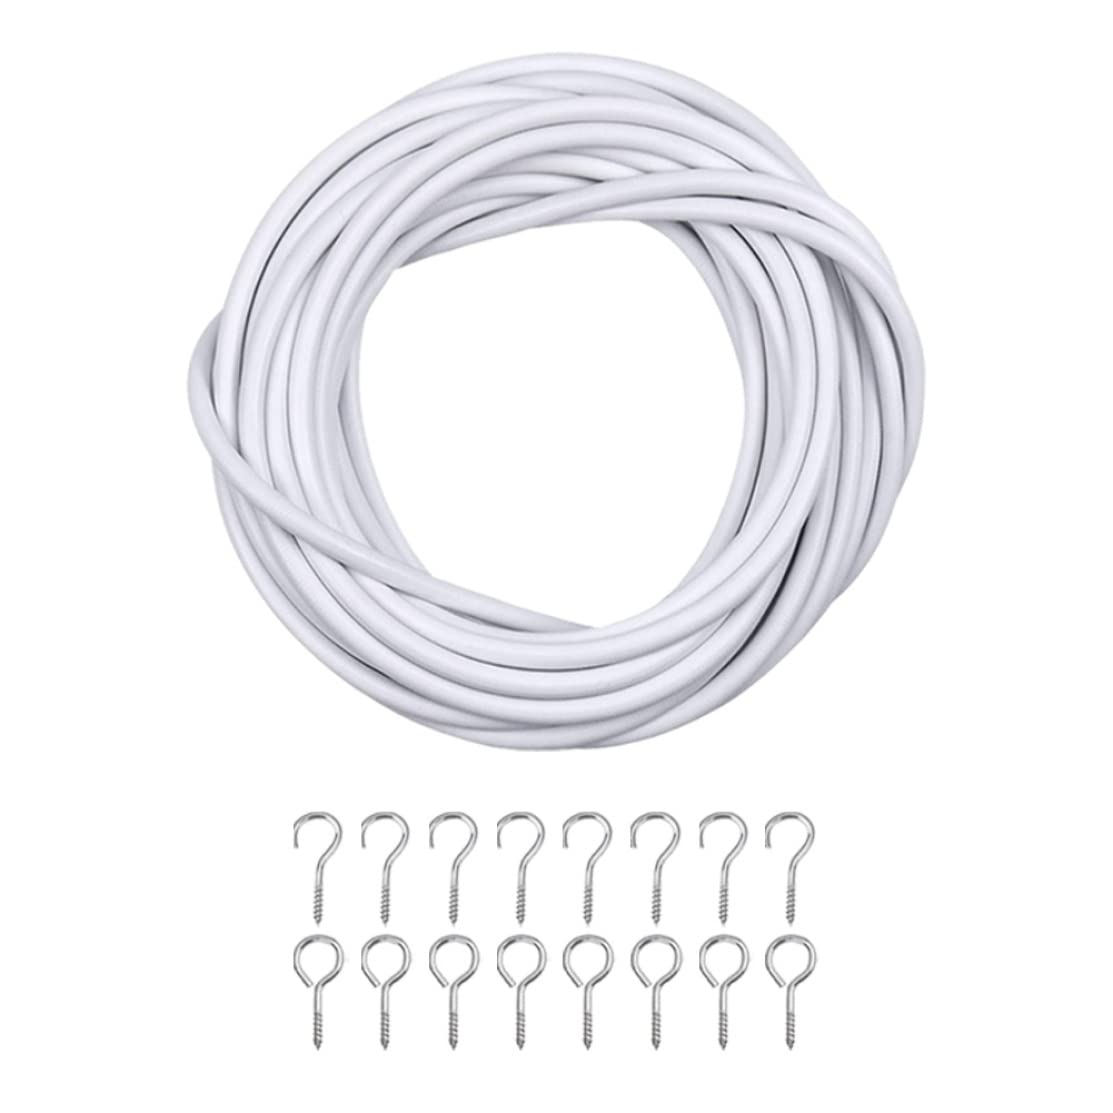 3M EXPANDING CURTAIN WIRE & HOOKS COMPLETE SET FOR NET CURTAIN WINDOWS & DOORS 